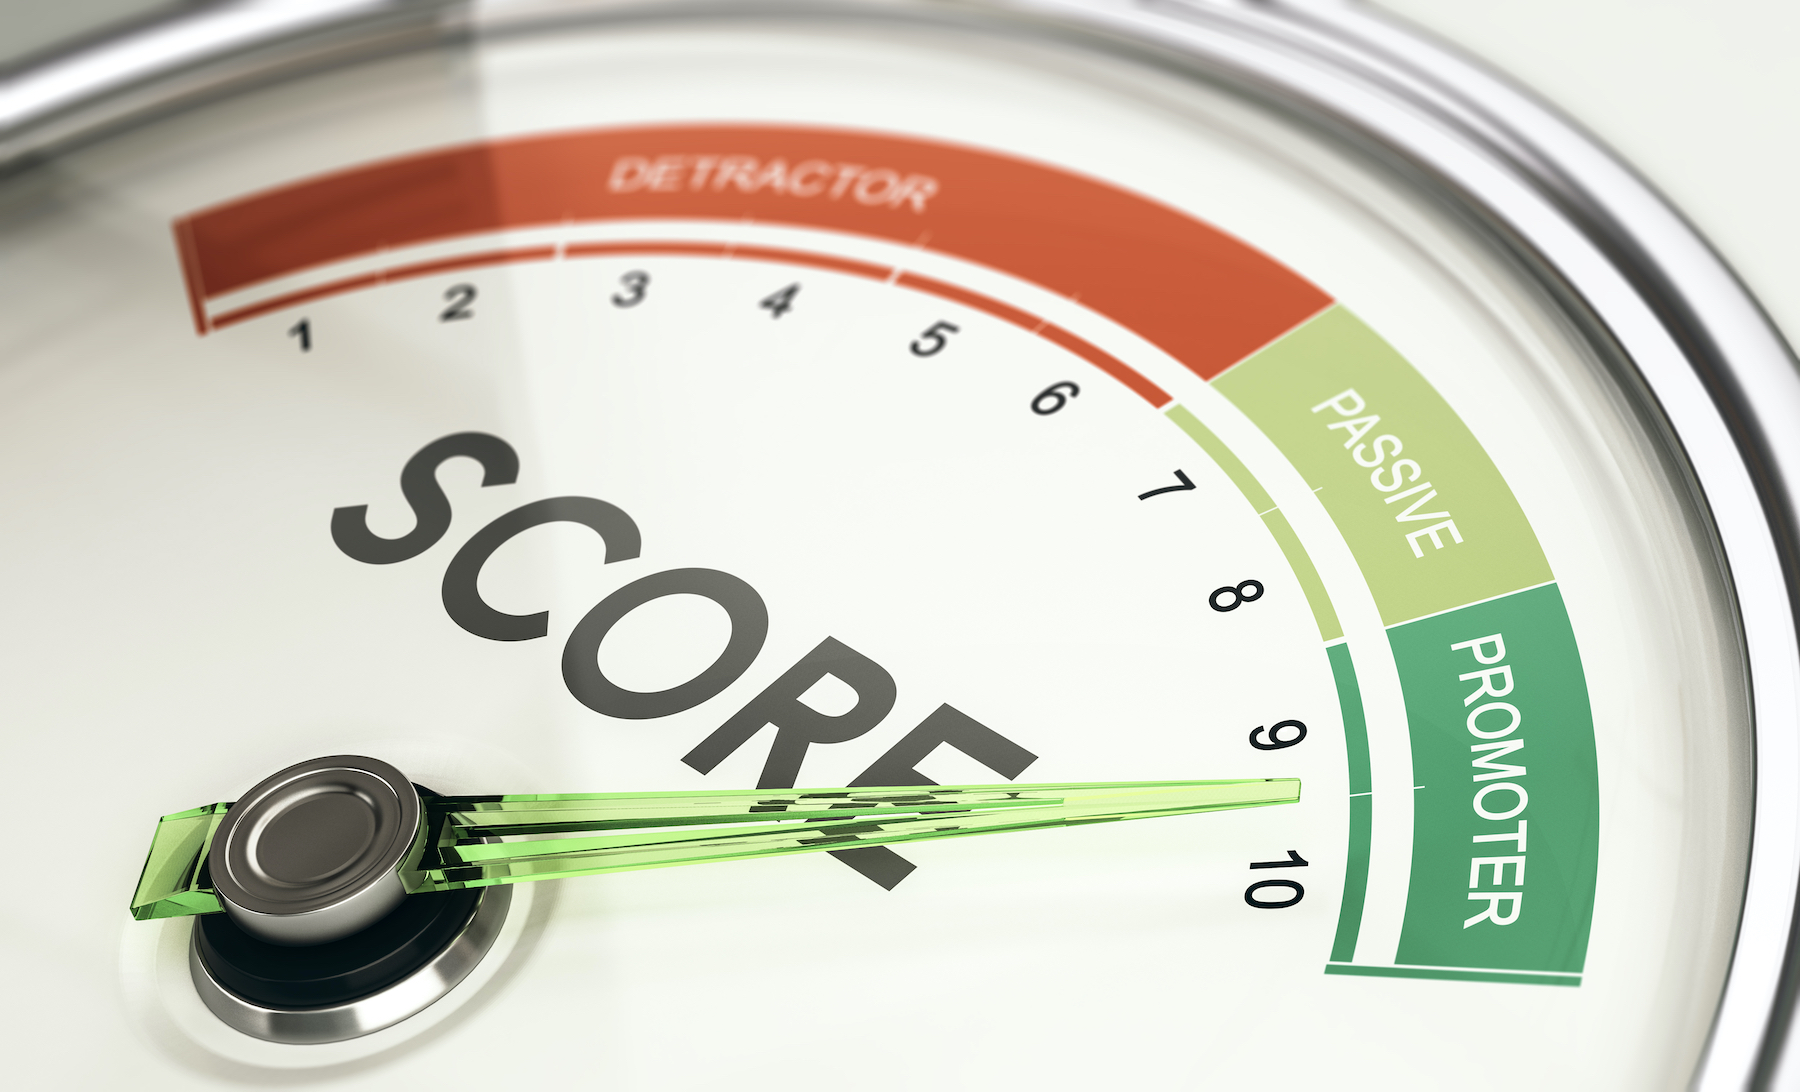 What Is a Net Promoter Score? Should Your Company Care About Its NPS?